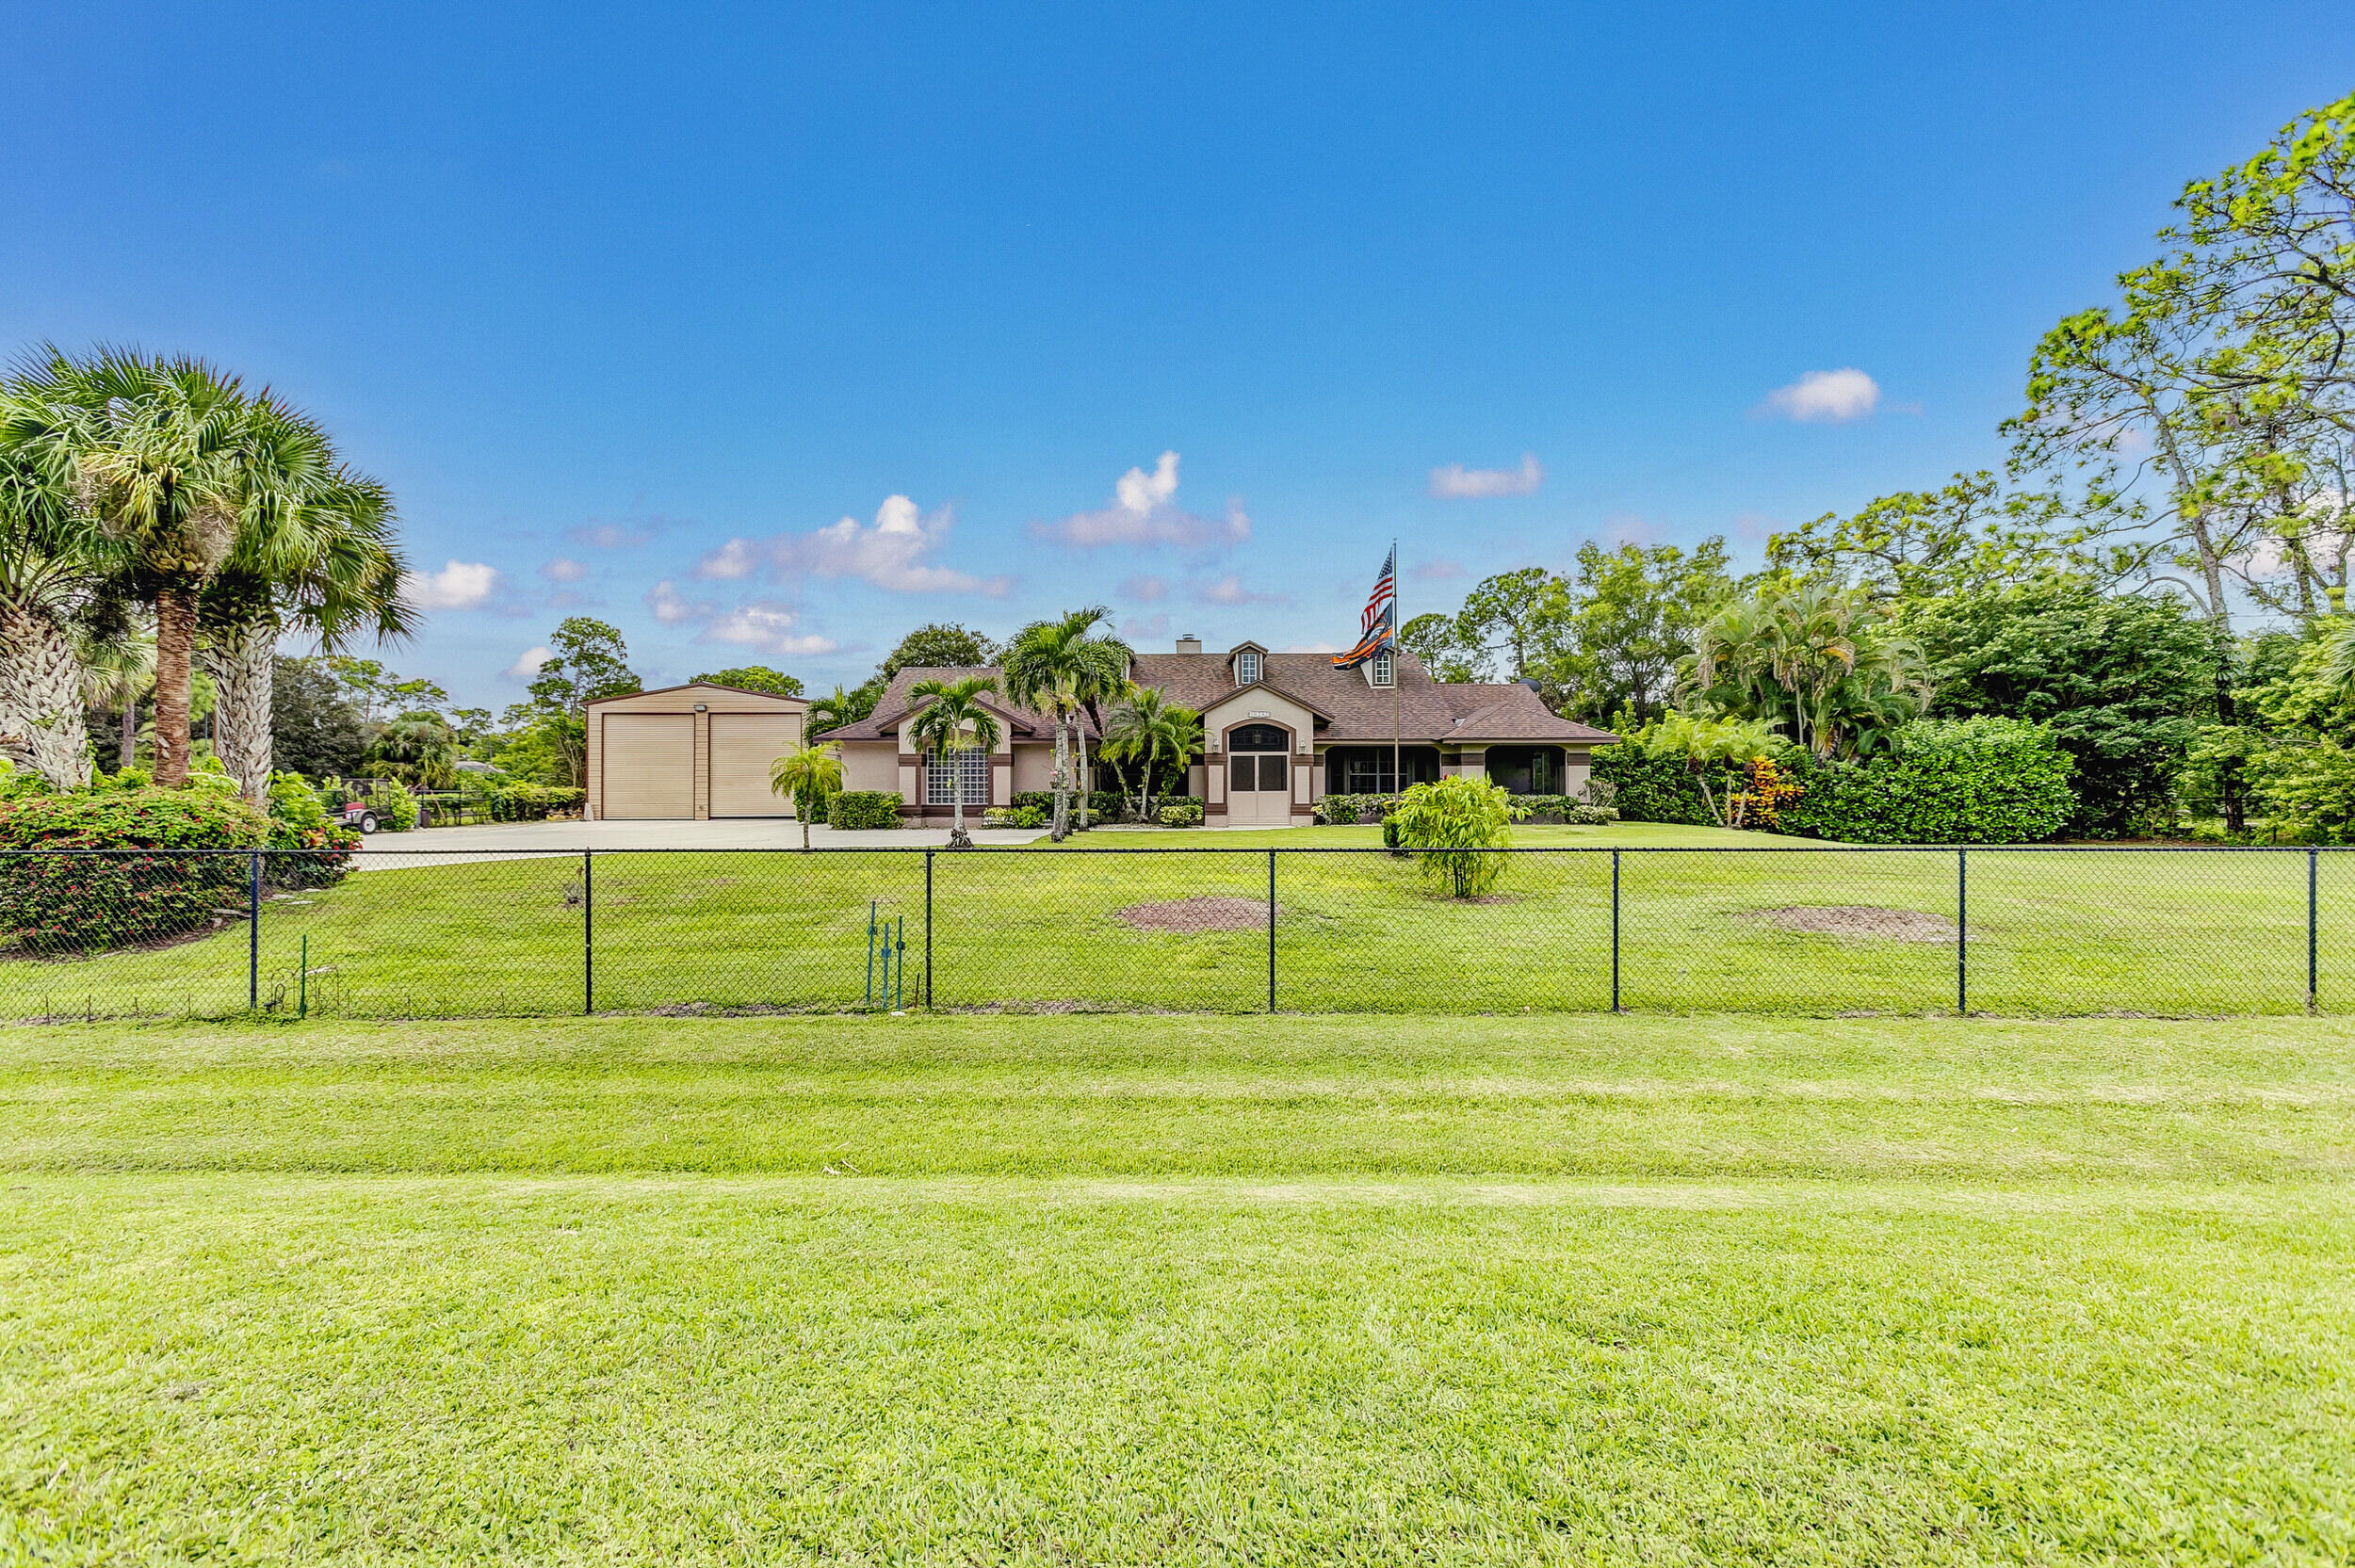 Never listed on the MLS! Beautiful single family pool home on 1.31 acres in Loxahatchee. Has a garage that will fit 2 40' campers, measures at 30' x 50', plenty of room for parking with a huge driveway & 2 car attached garage. Lot is completely fenced & very private, also has a canal on the East side of the property for more privacy. Updated kitchen with new appliances, backsplash & counter tops. Split bedroom layout  & a great back patio for entertaining! Wiltshire Rd is a paved road and has easy access to Seminole Pratt and Okeechobee Blvd. AC 2015, Roof 2019, Solar Water Heater 2019